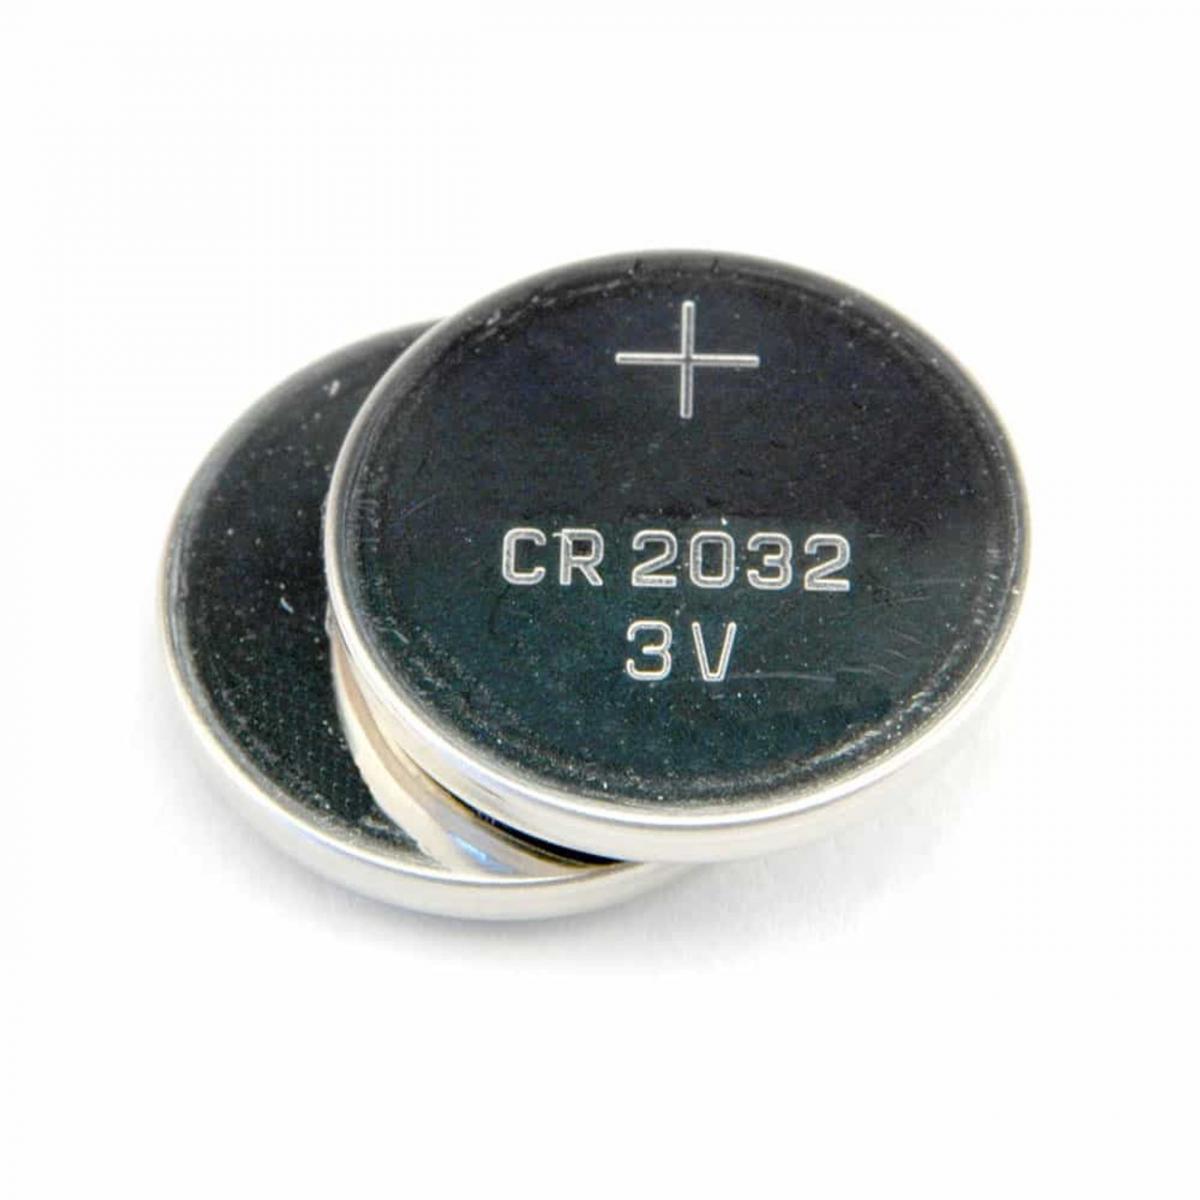 cr2032 battery specifications, characteristics and frequently asked questions